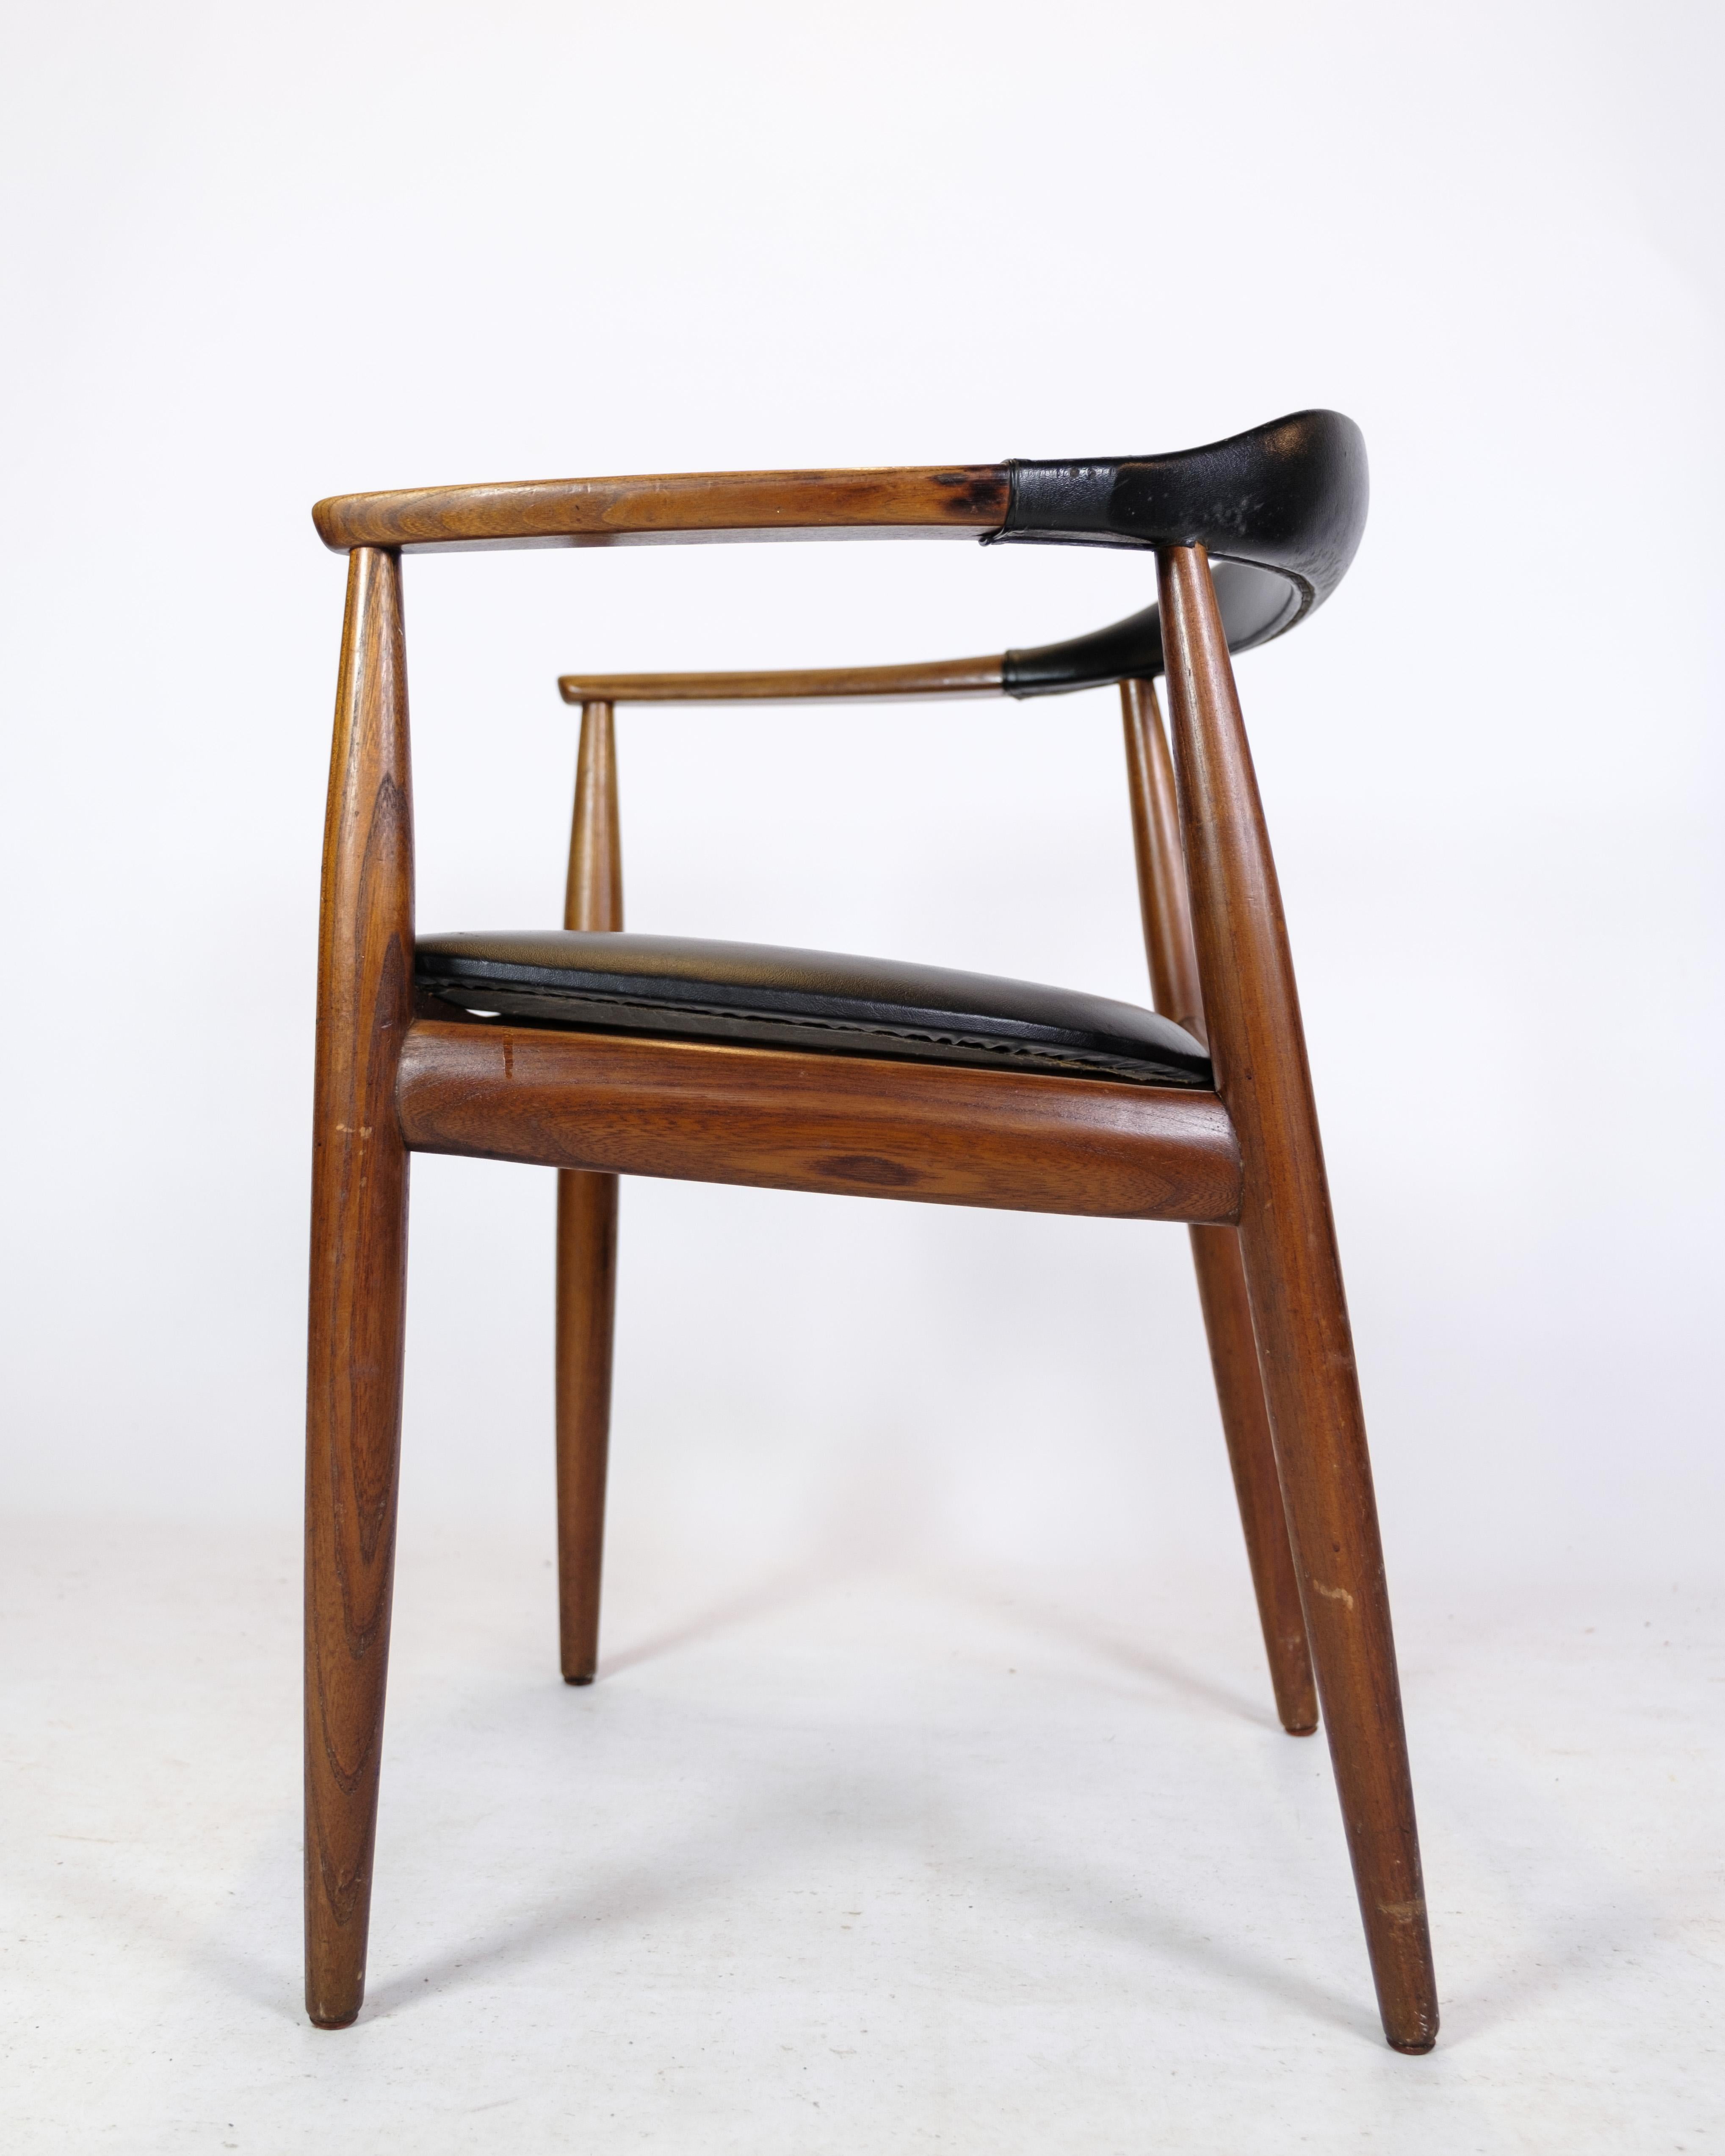 Armchair in Teak Wood and Black Leather by Illum Wikkelsø & Niels Eilersen 1960 In Good Condition For Sale In Lejre, DK